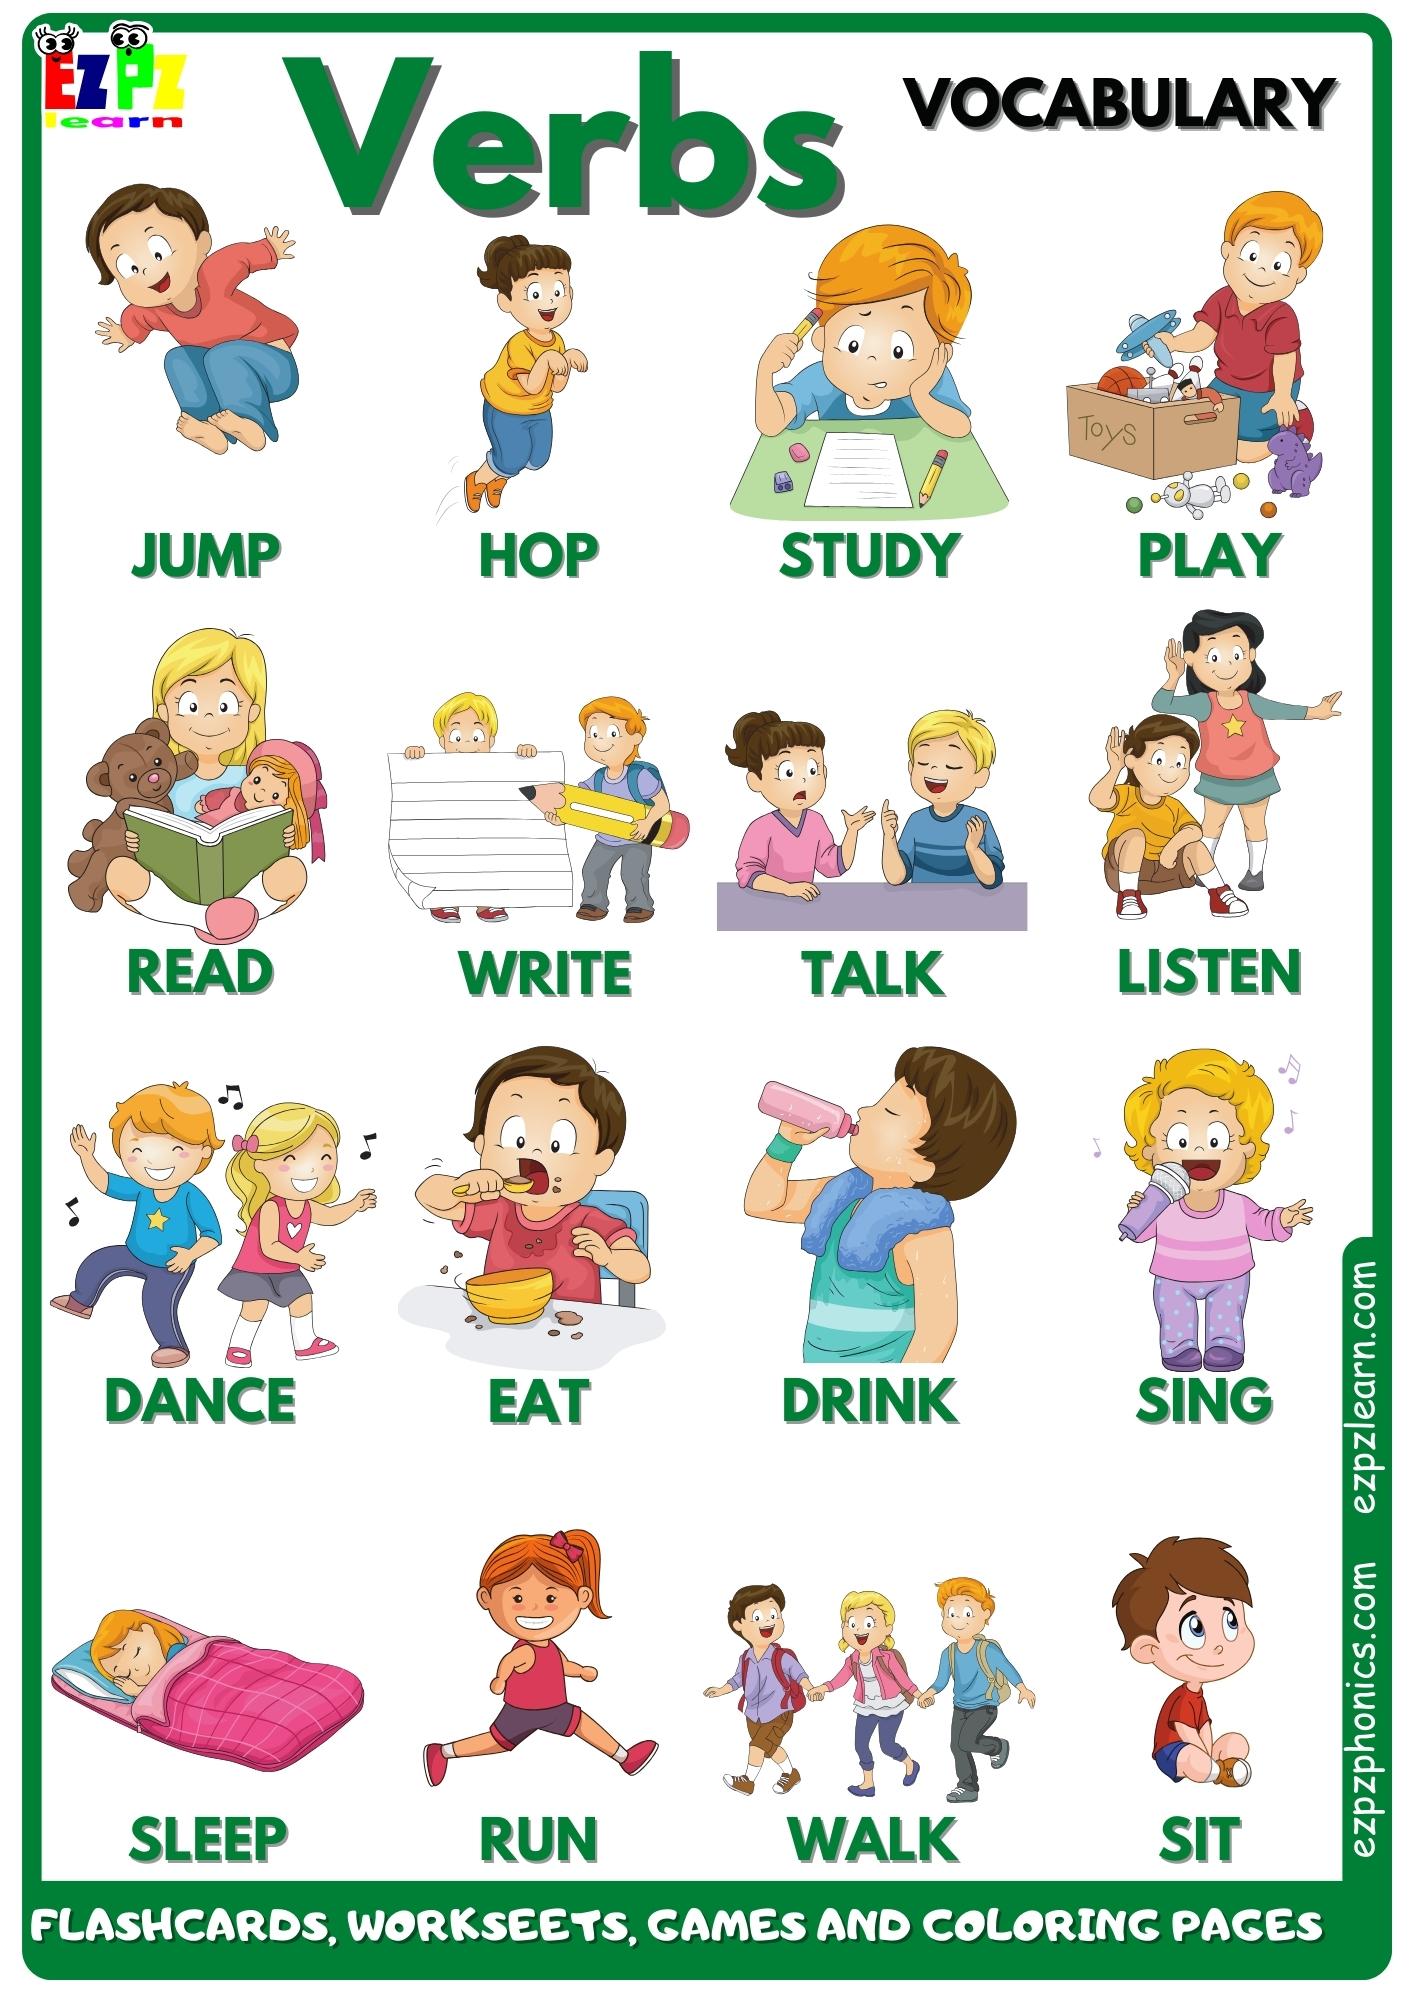 Verbs and Action Words Vocabulary Free English Vocabulary